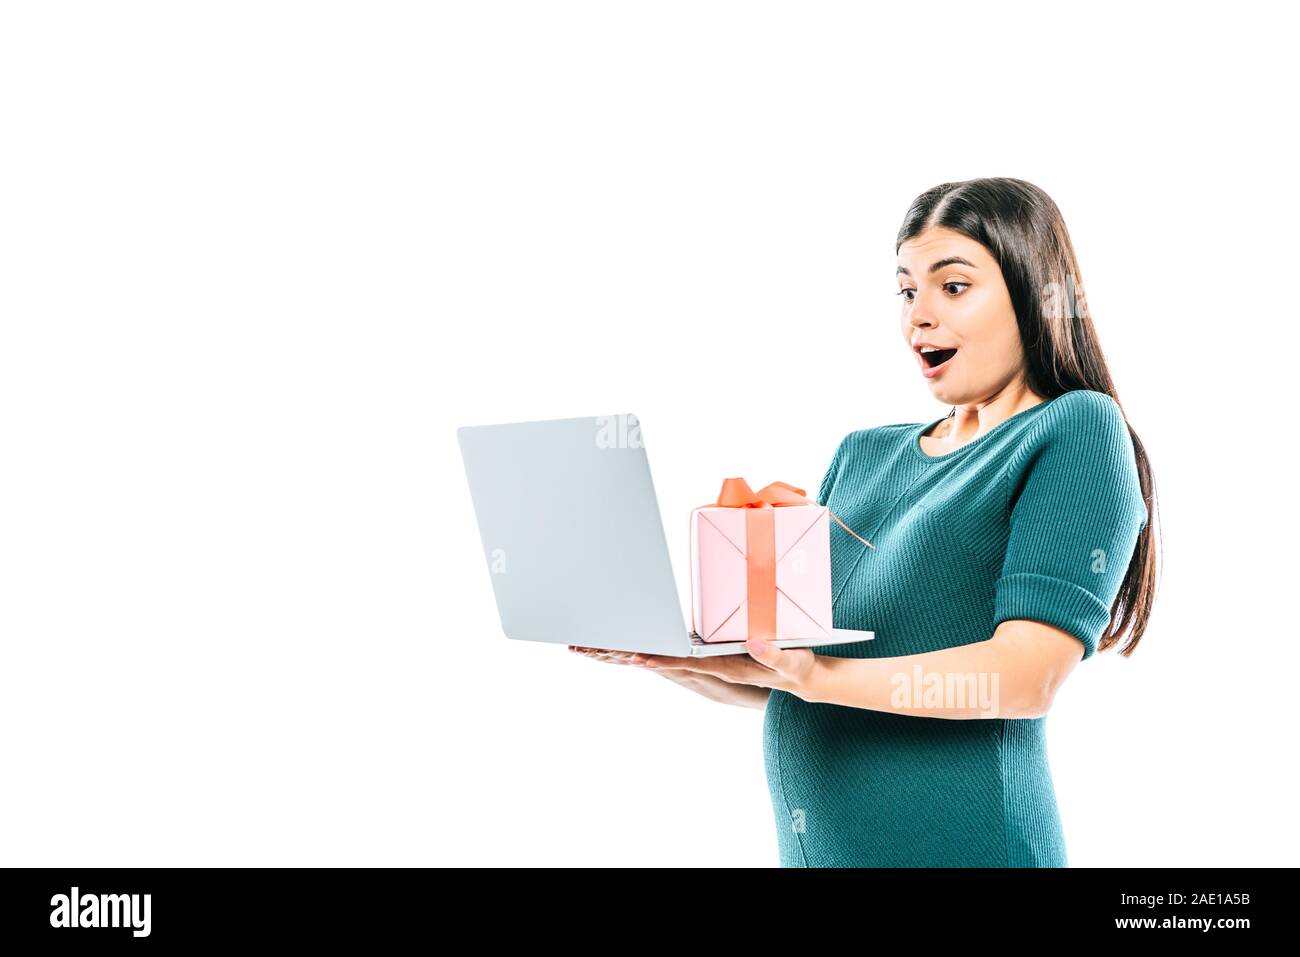 shocked pregnant girl holding laptop and gift isolated on white Stock Photo